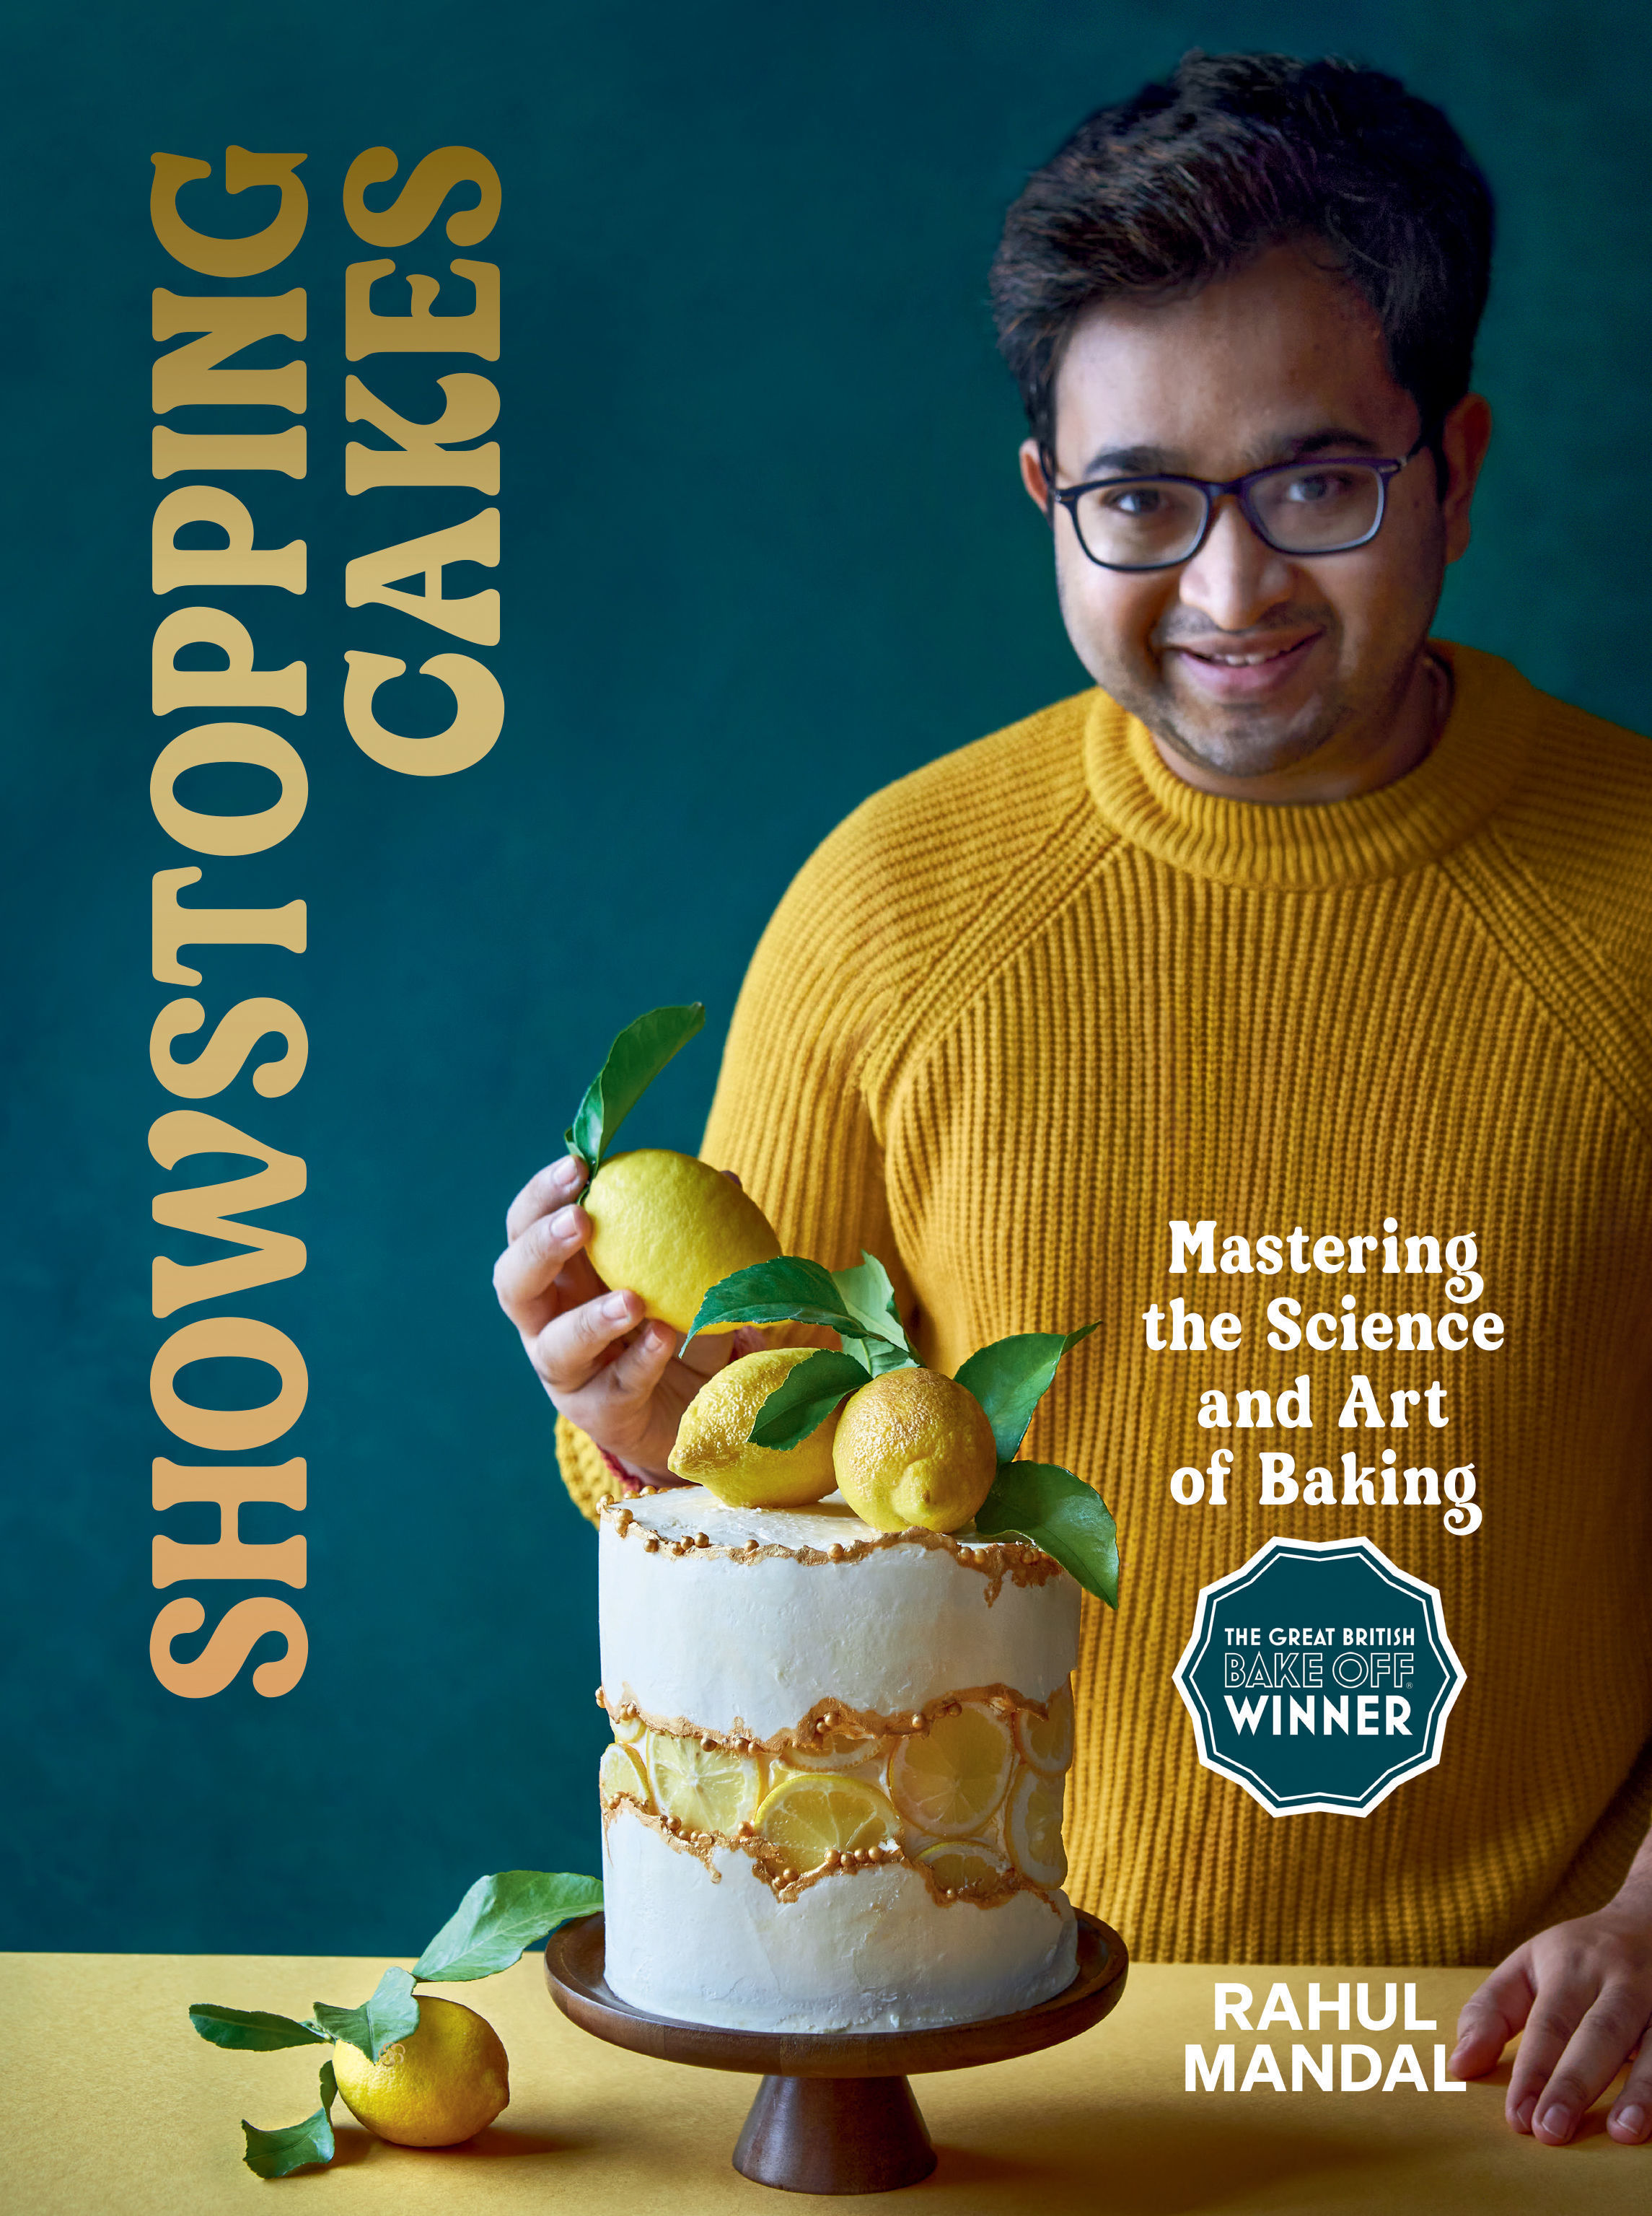 Rahul Mandal on baking to make friends and his fear of Paul Hollywood HeraldScotland photo